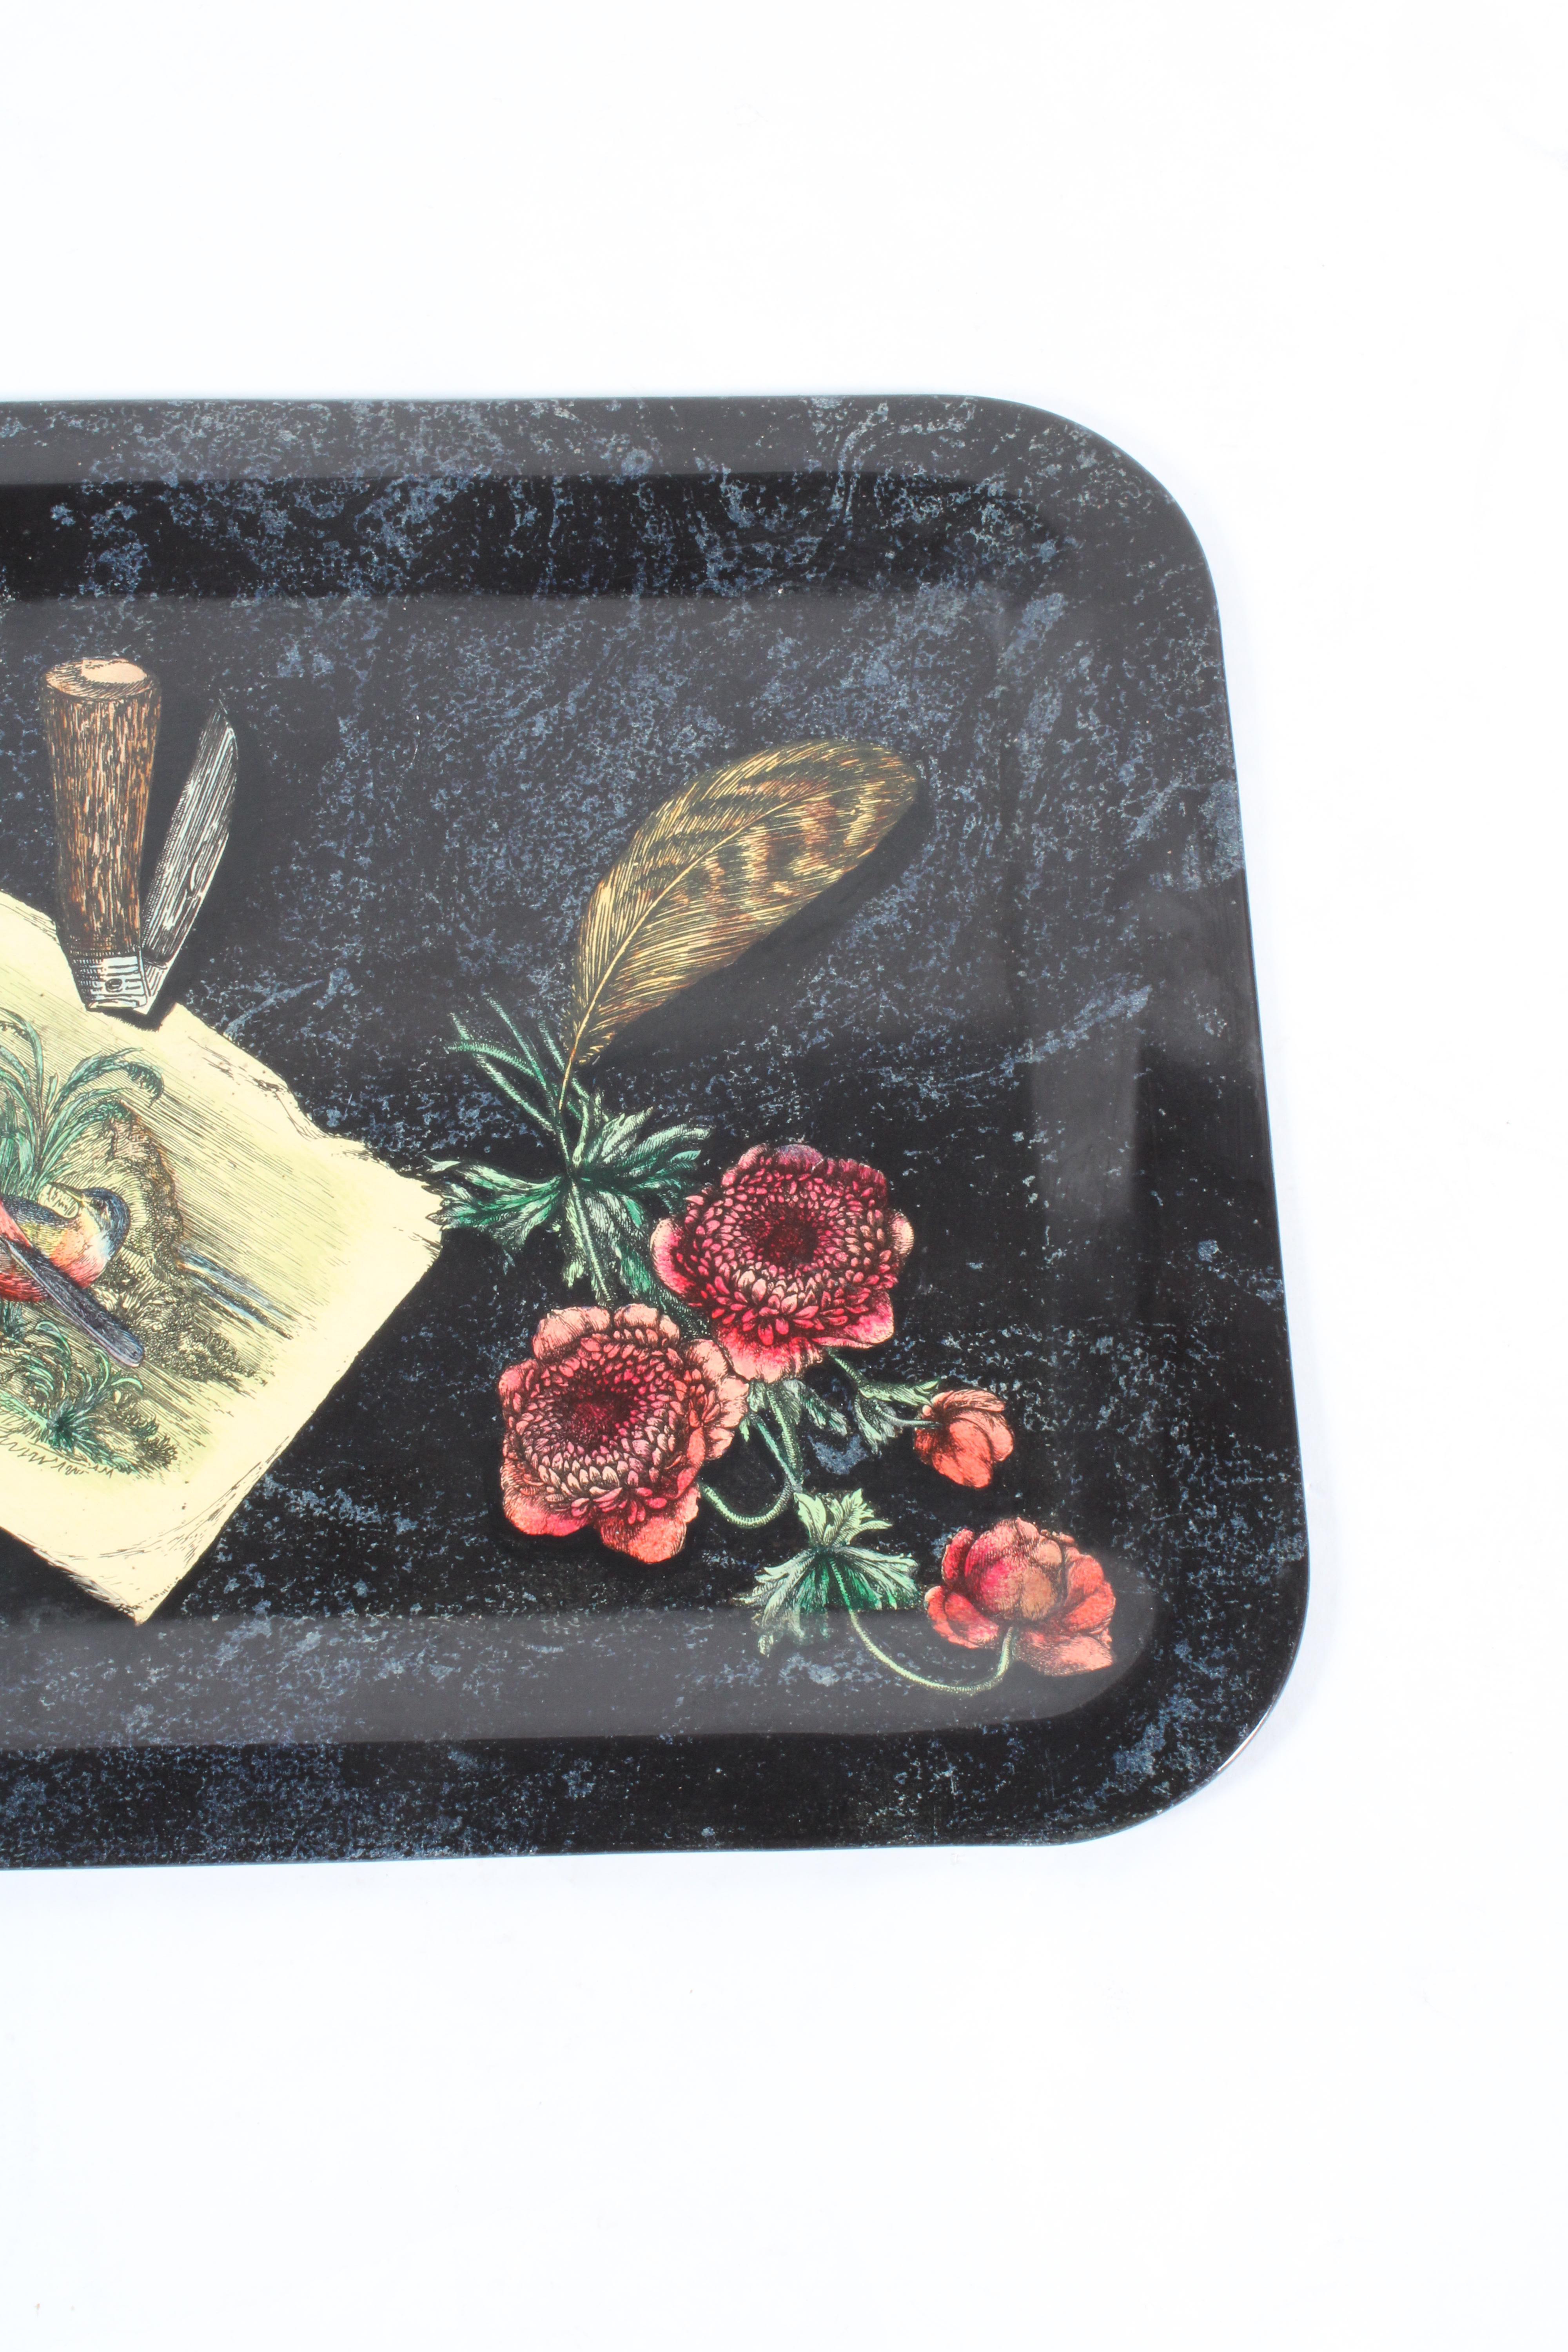 Exquisite original Fornasetti tole tray circa 1950 bearing makers label to the base. Litographic transfer print on aluminium depicting a beautiful bird and floral arrangement. A must have for any collector of Fornasetti and Italian design
Measures: